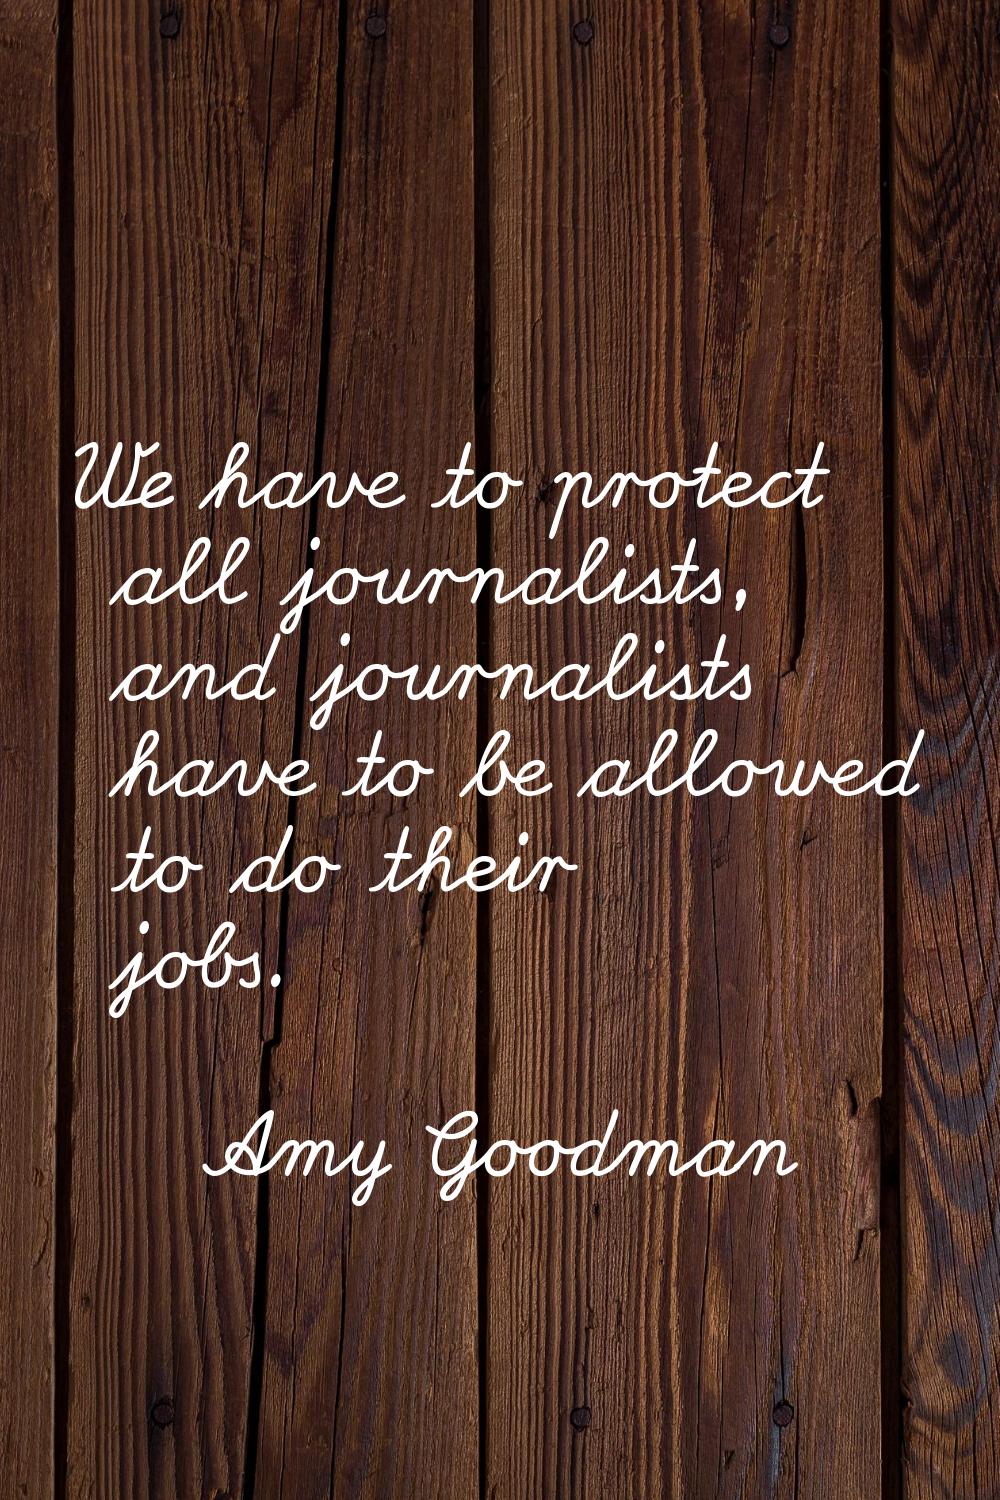 We have to protect all journalists, and journalists have to be allowed to do their jobs.